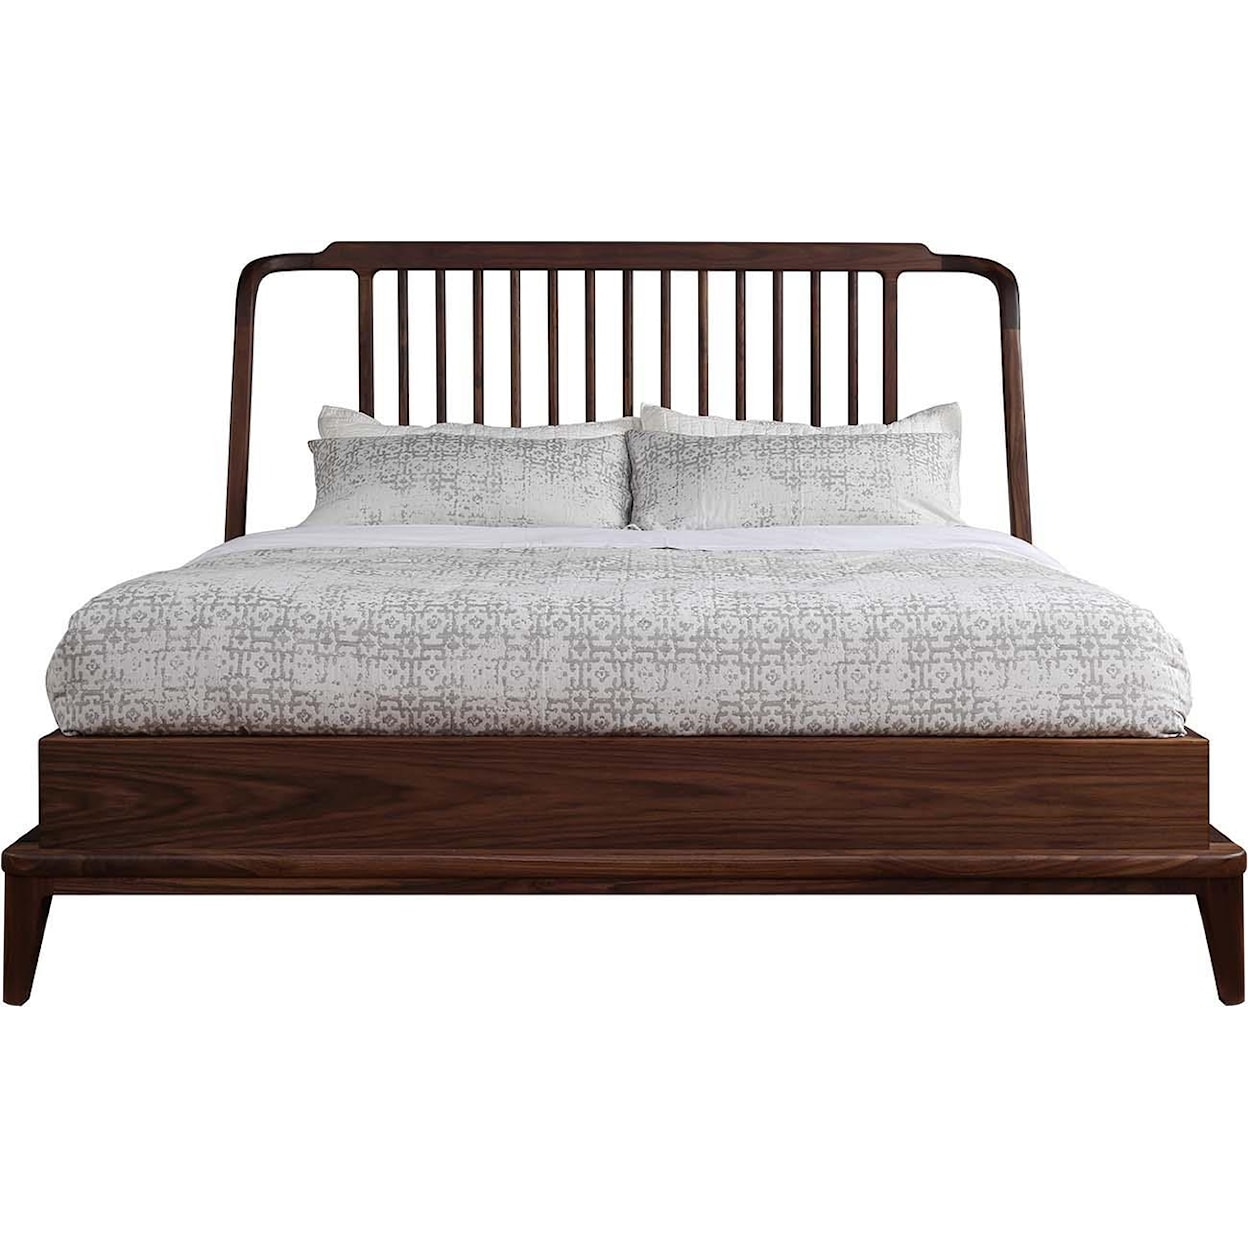 Stickley Walnut Grove Queen Spindle Bed